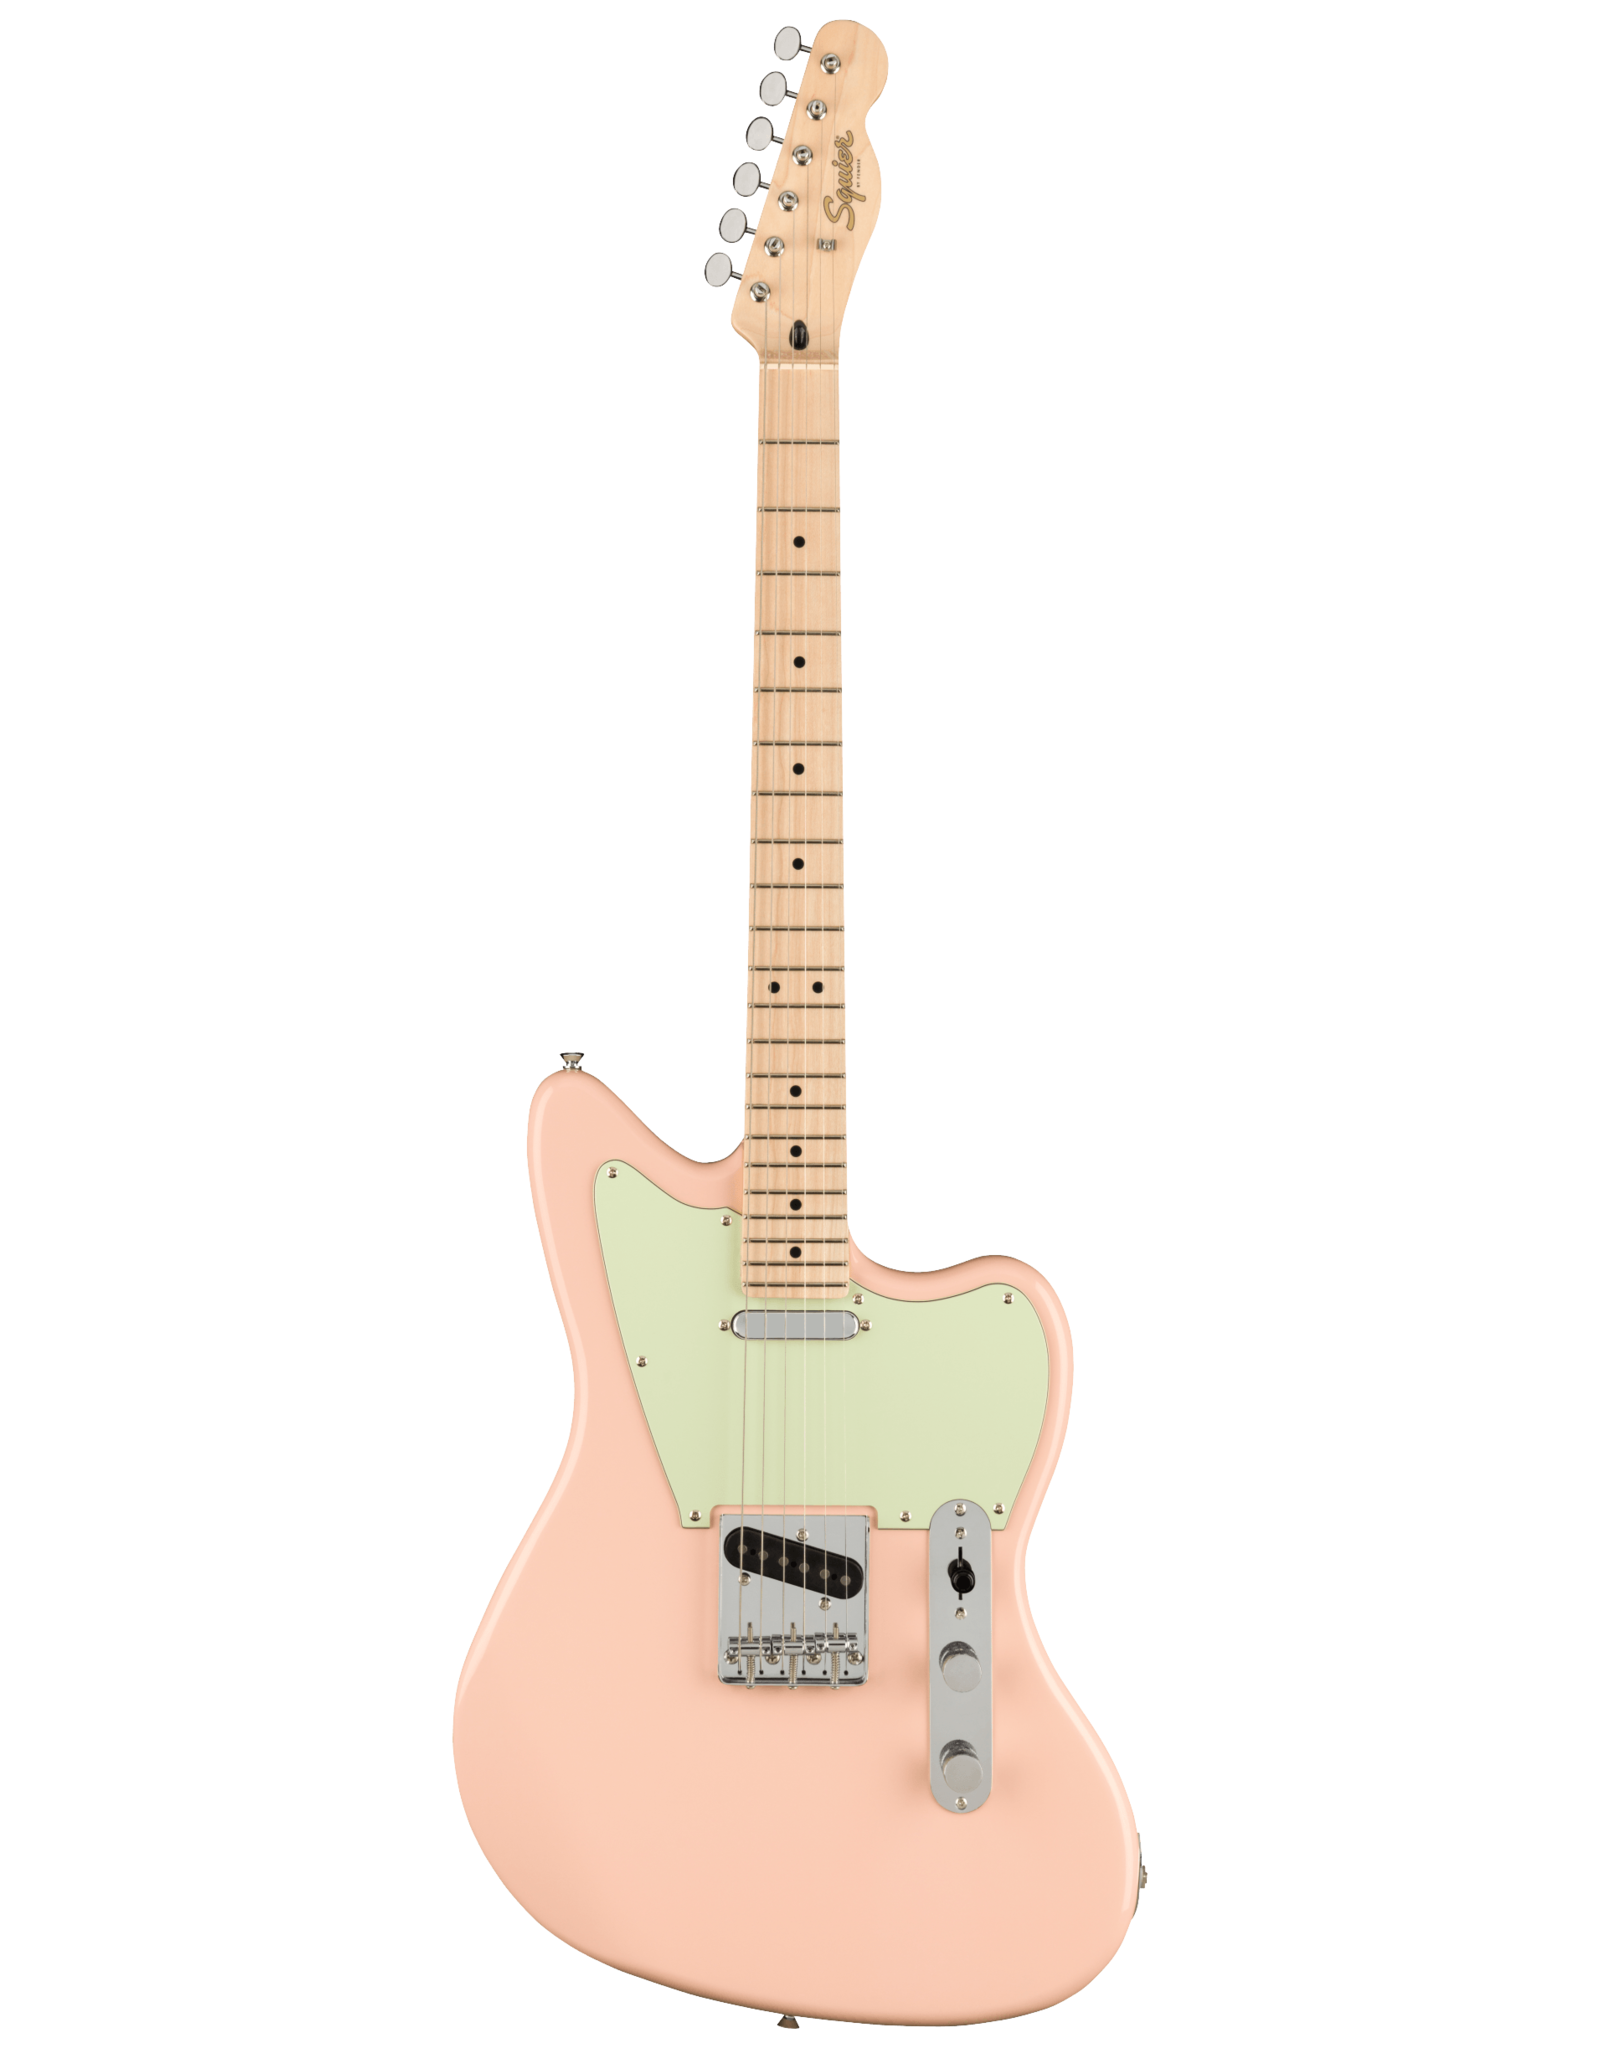 Squier Squier Paranormal Offset Telecaster, Maple Fingerboard, Mint Pickguard, Shell Pink